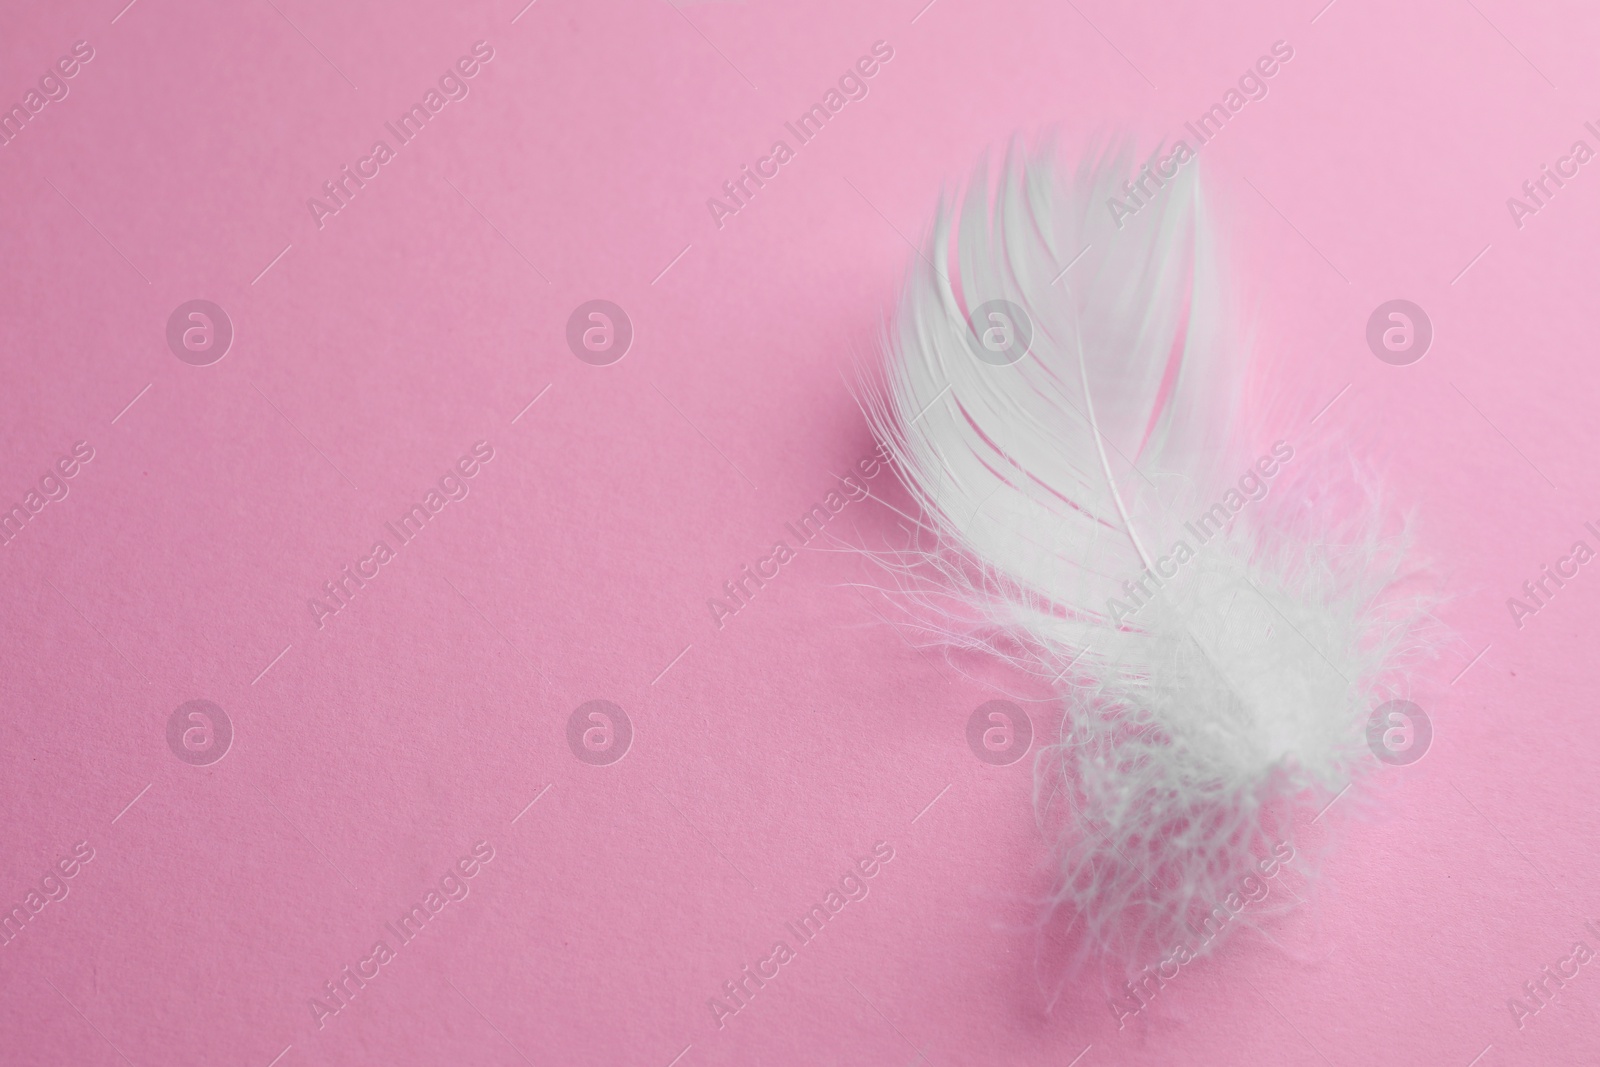 Photo of Fluffy white bird feather on pink background, top view. Space for text